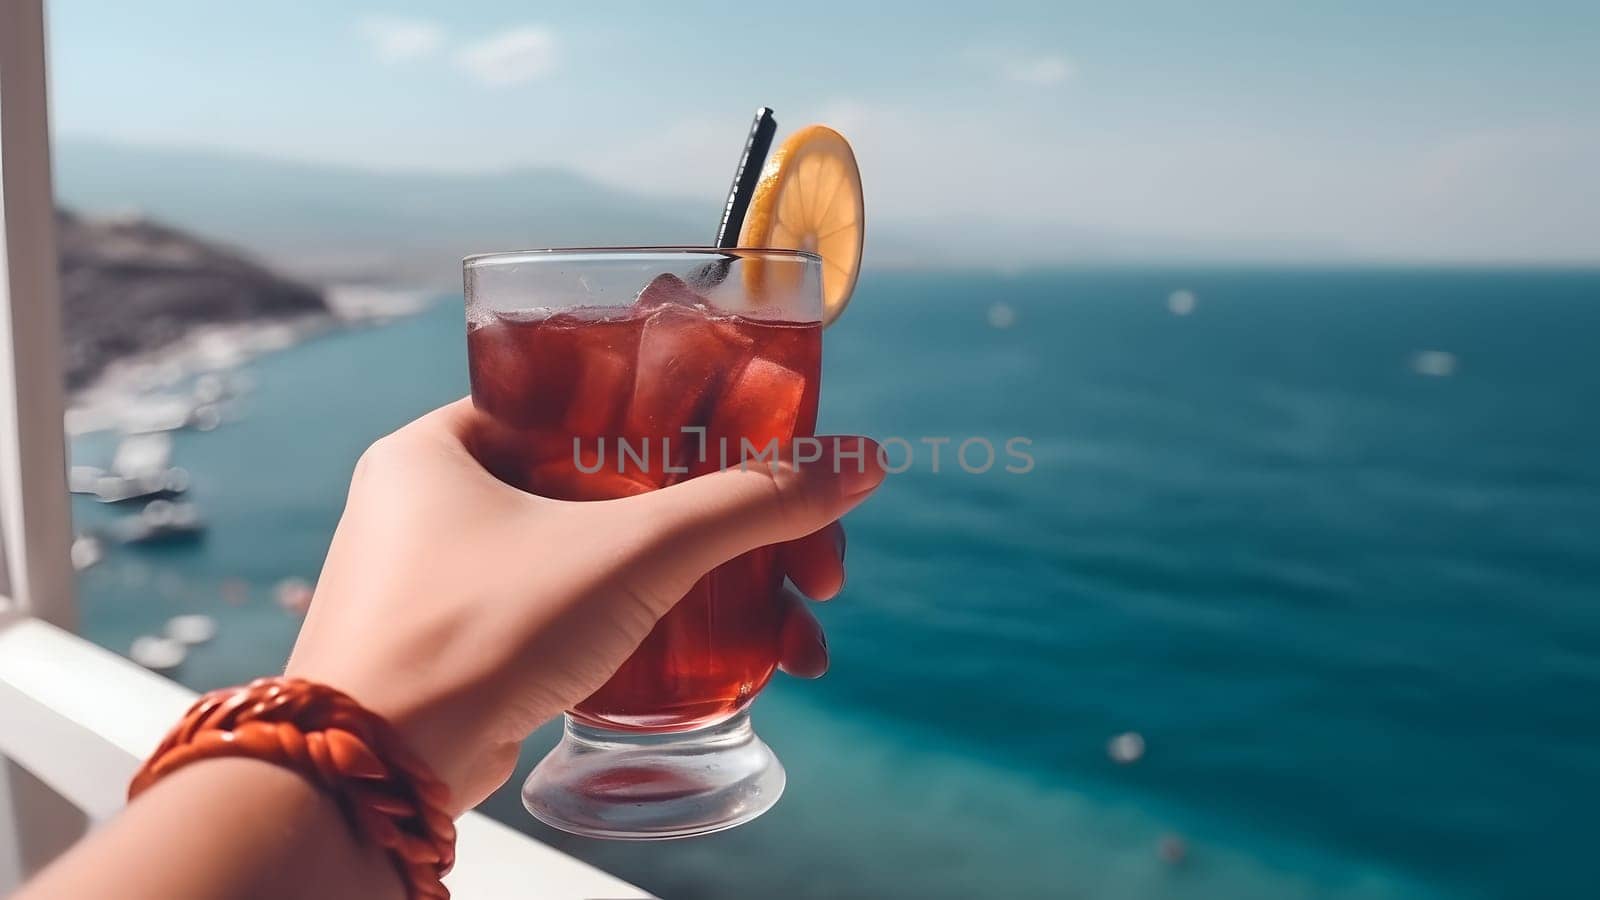 caucasian woman hand holding glass of cocktail on blurry sea shoreline background at sunny day, neural network generated image by z1b